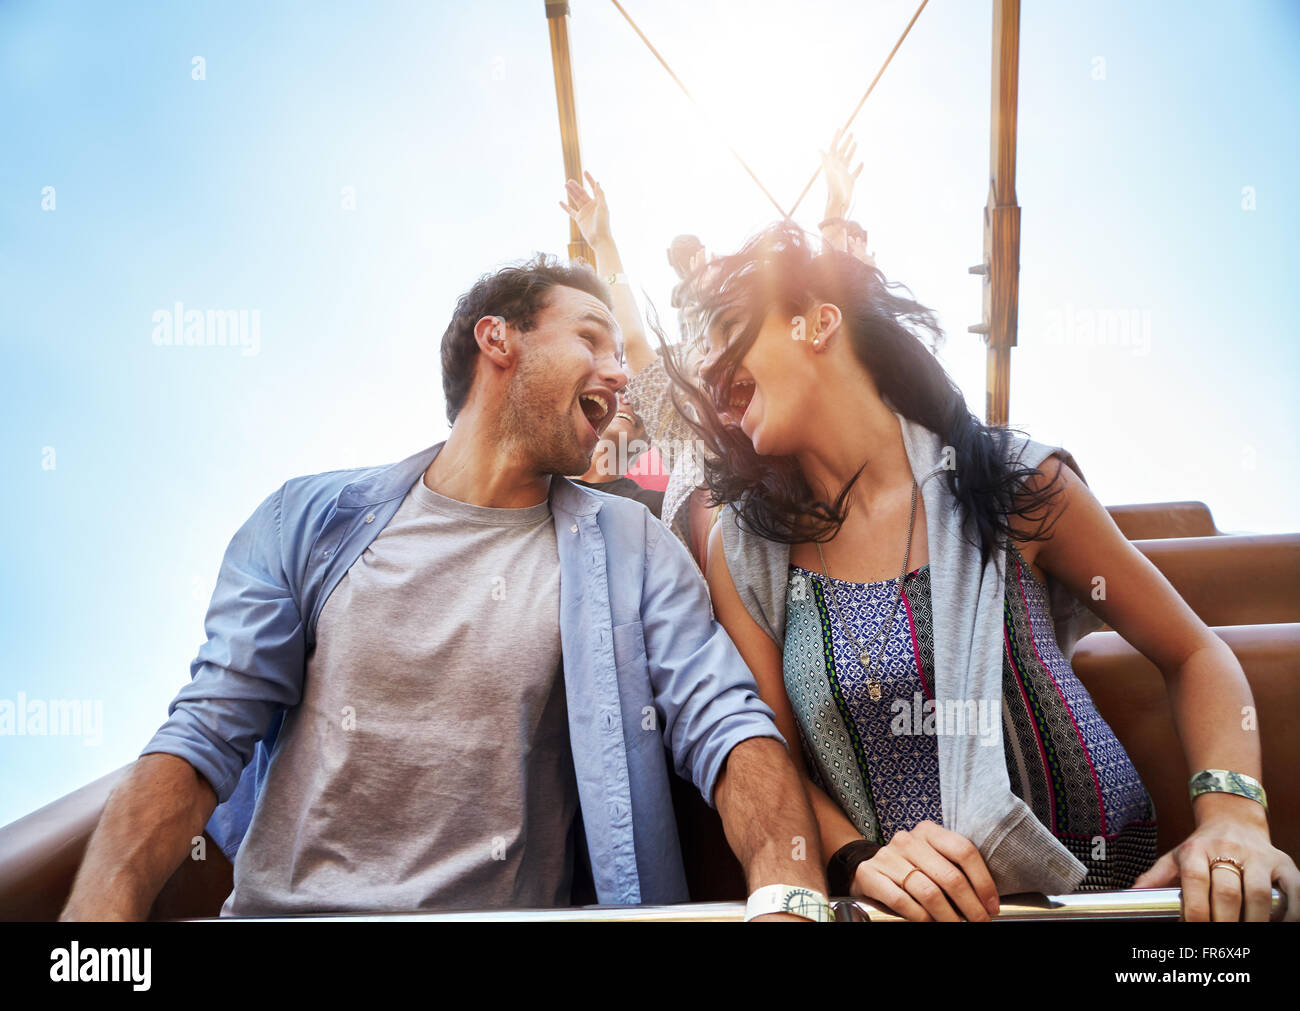 Exhilarated young couple on amusement park ride Stock Photo